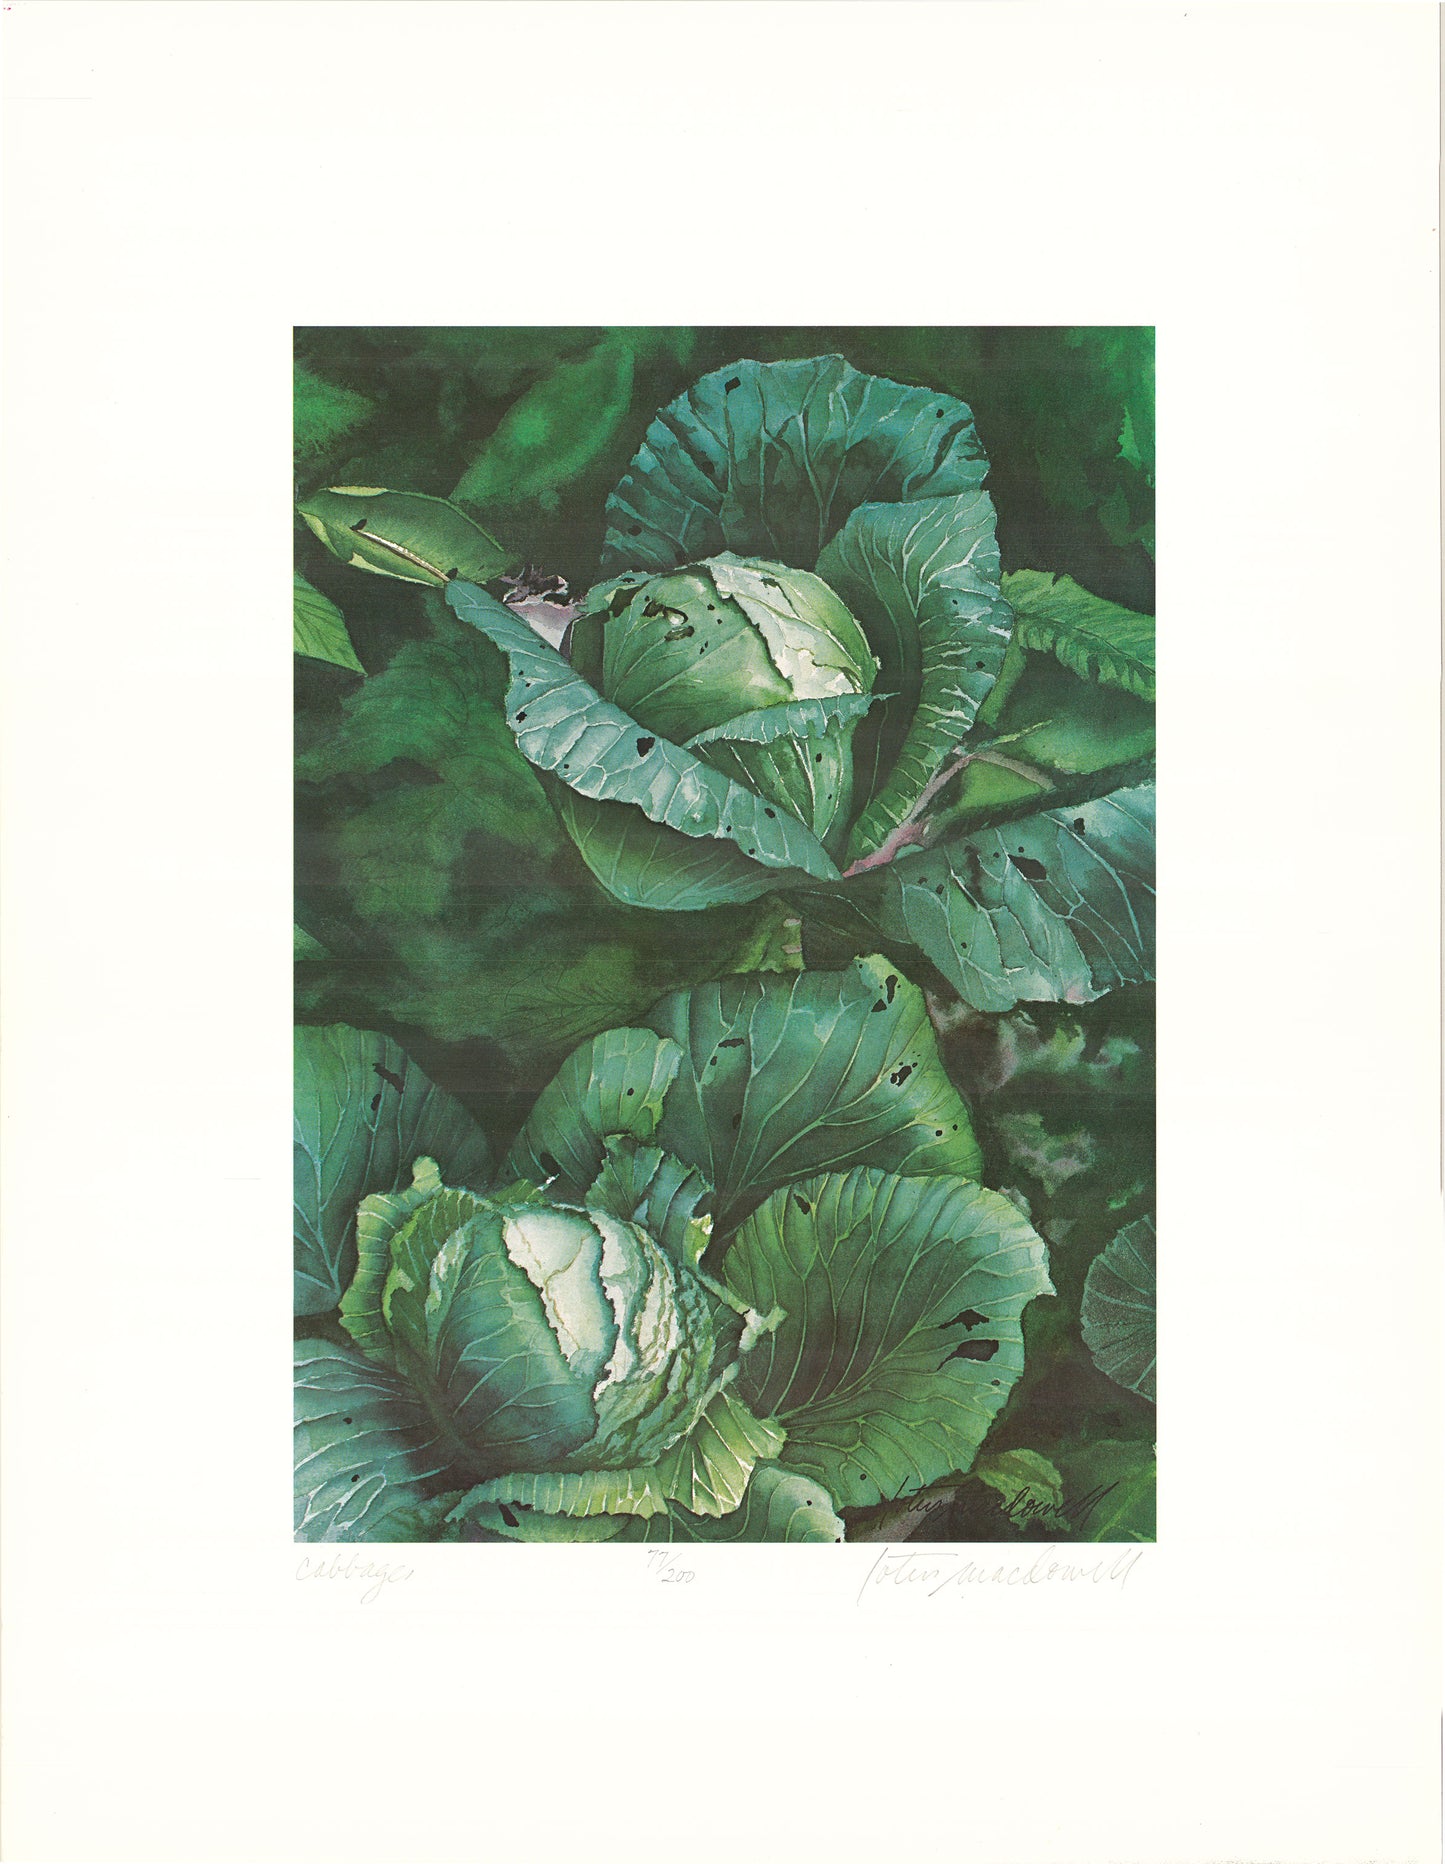 Cabbages - Limited Edition Print, original watercolor by Lotus MacDowell, Artworks WV.  My oh my- it's love at first sight with this full color watercolor painting in deep greens and blues, aptly called “Cabbages" created by Lotus MacDowell. Now available as a limited-edition print, the rich hues make the painting seem positively three dimensional. 